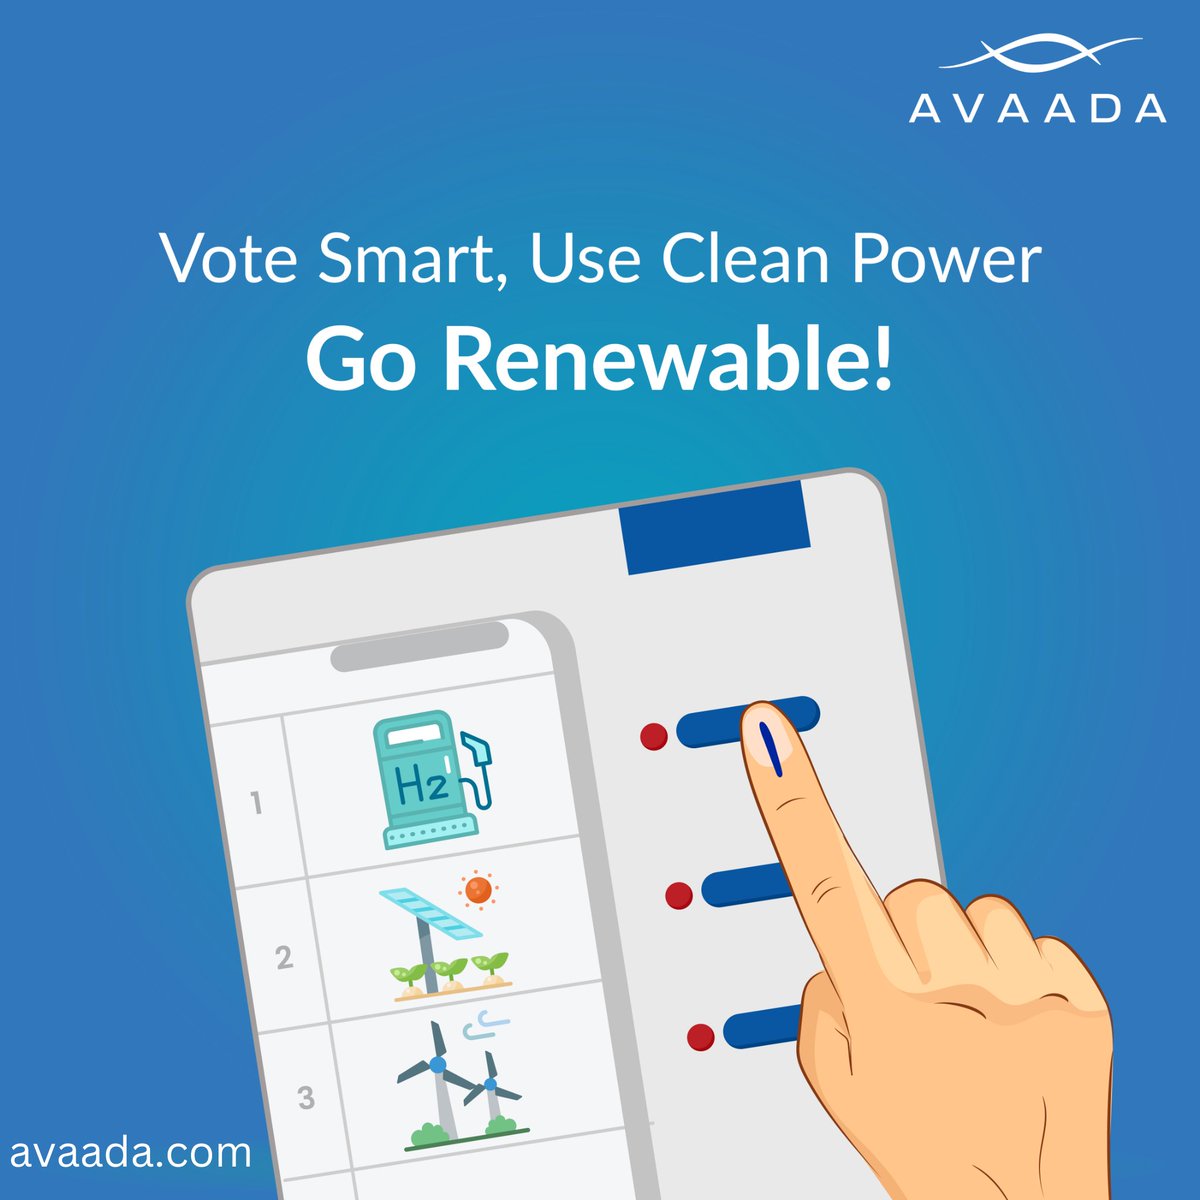 Select your power source wisely, just as you select your government. Switch to clean energy sources like Solar Rooftop and leave polluting fossil fuels behind. 

#VotingMatters #Choose #SolarRooftop #CleanEnergy #ThinkSustainableThinkAvaada #AvaadaGroup